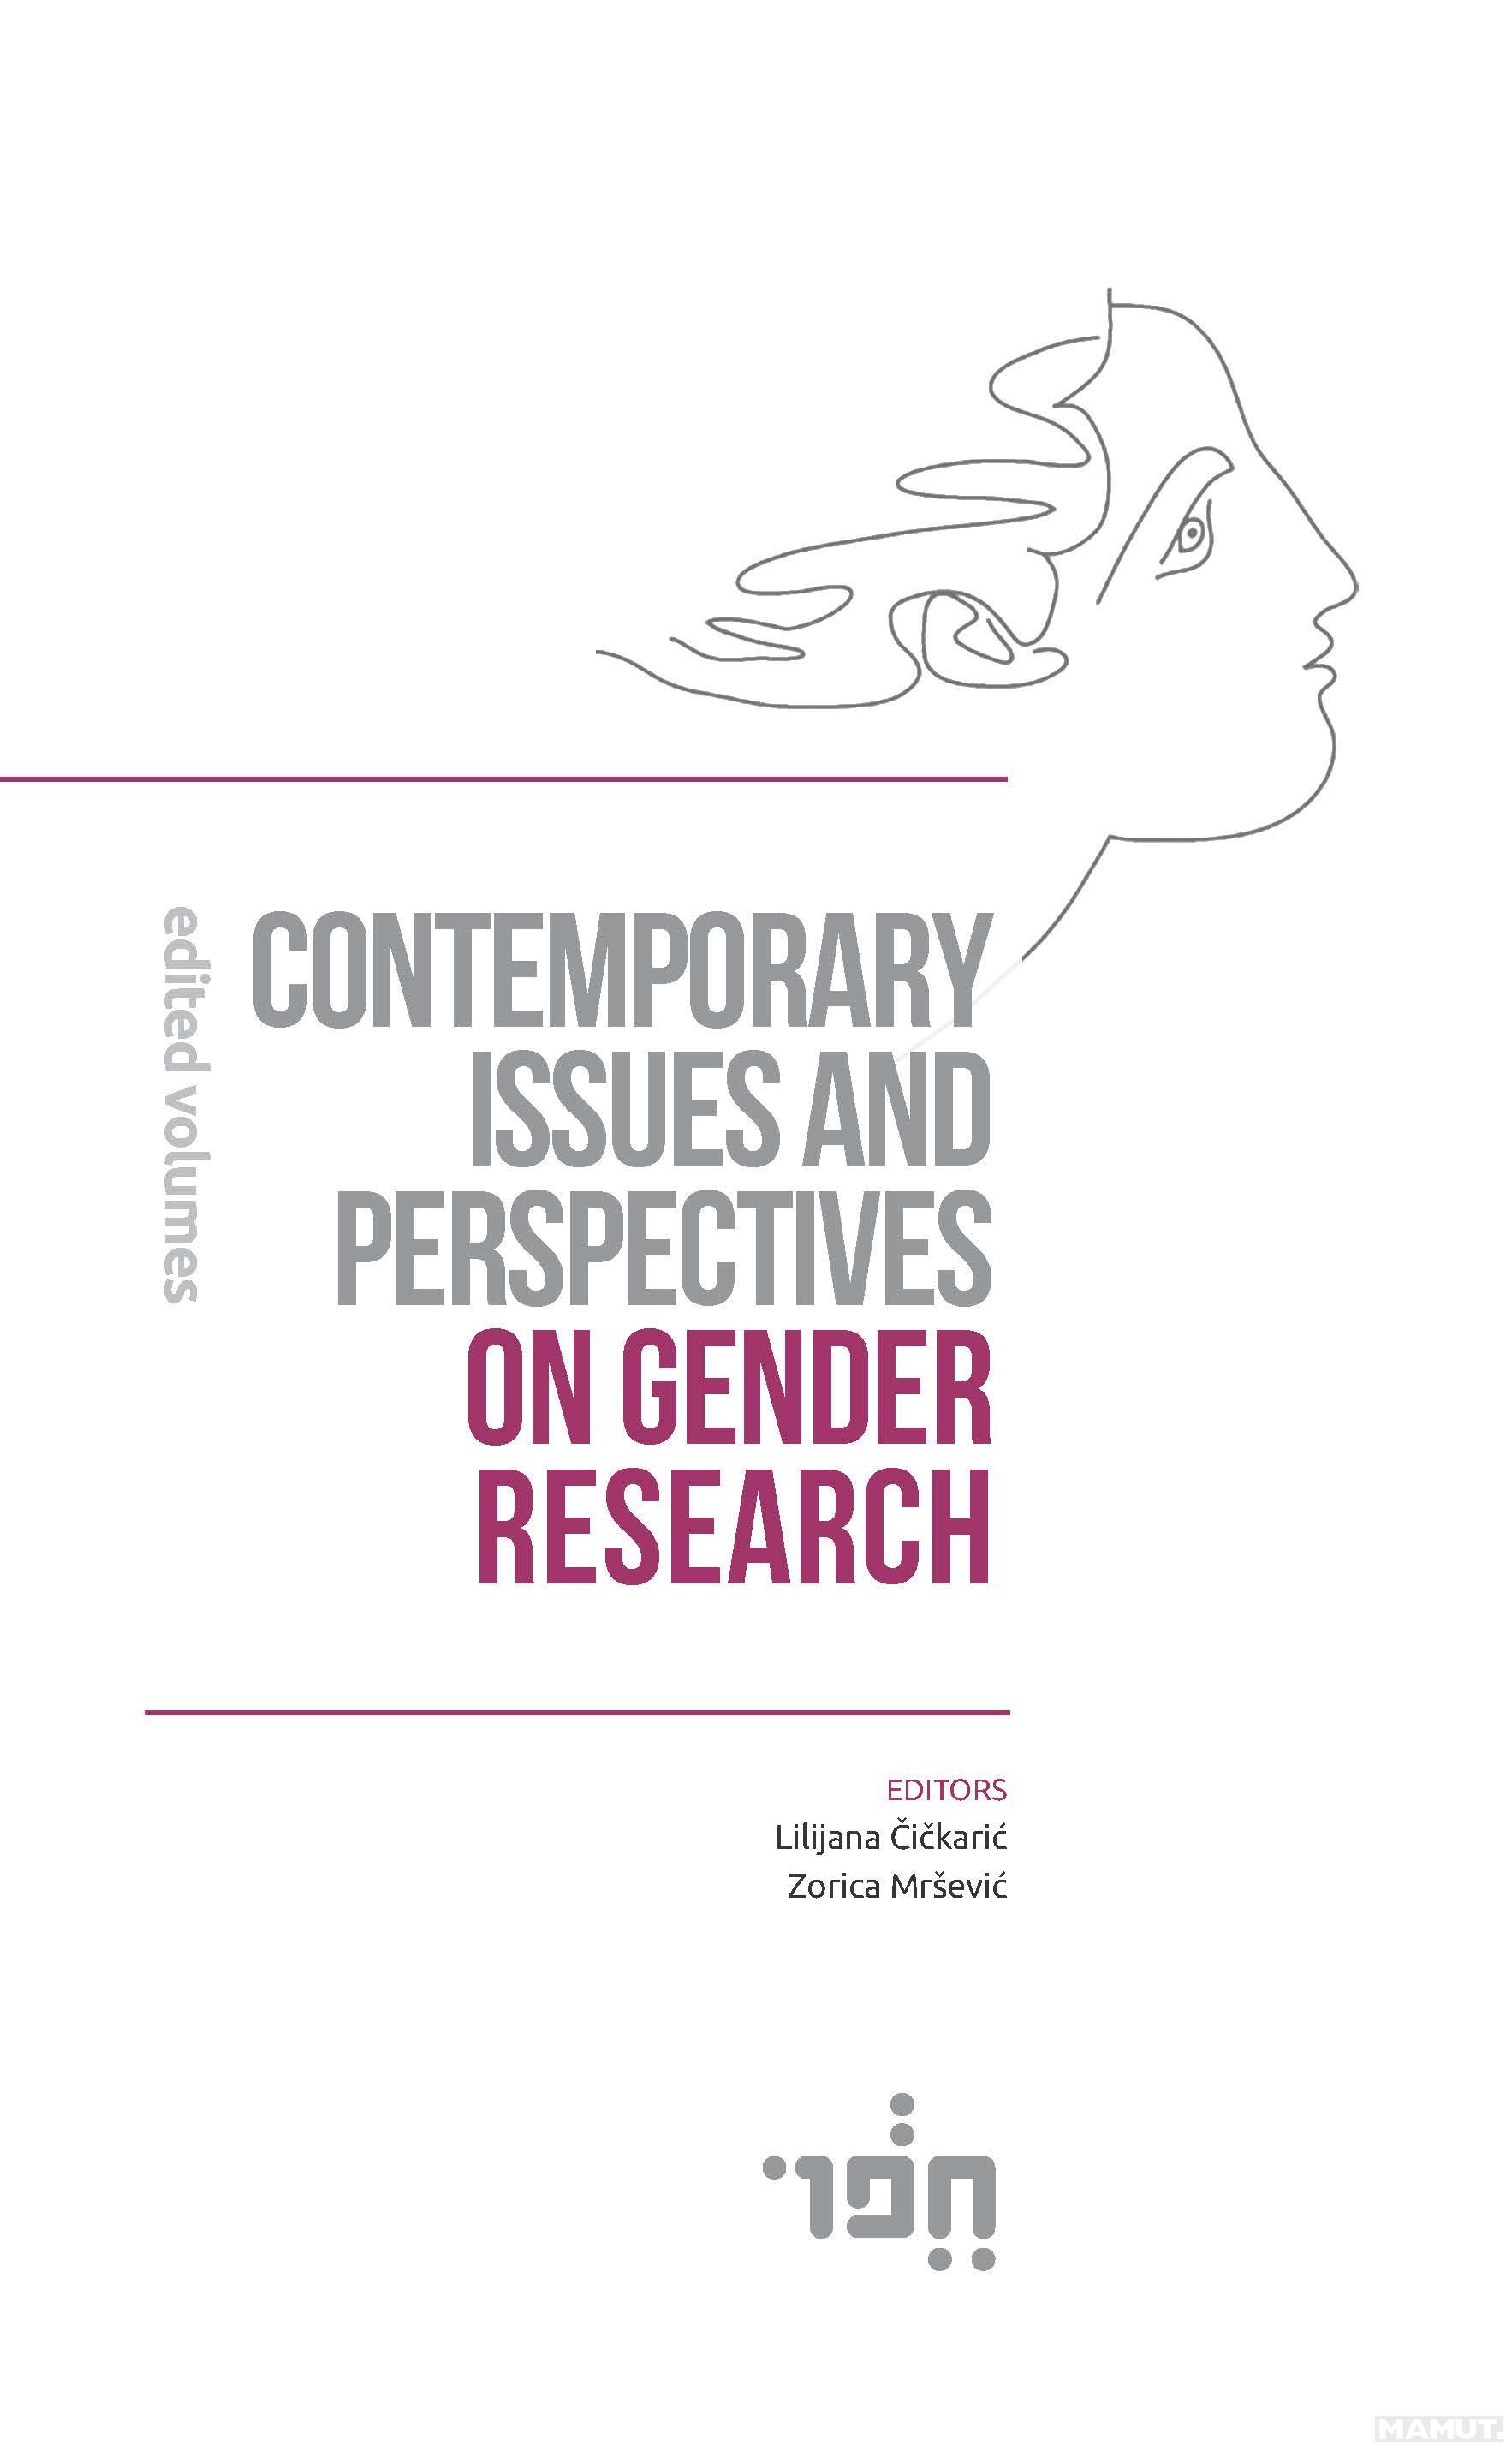 CONTEMPORARY ISSUES AND PERSPECTIVES ON GENDER RESEARCH 